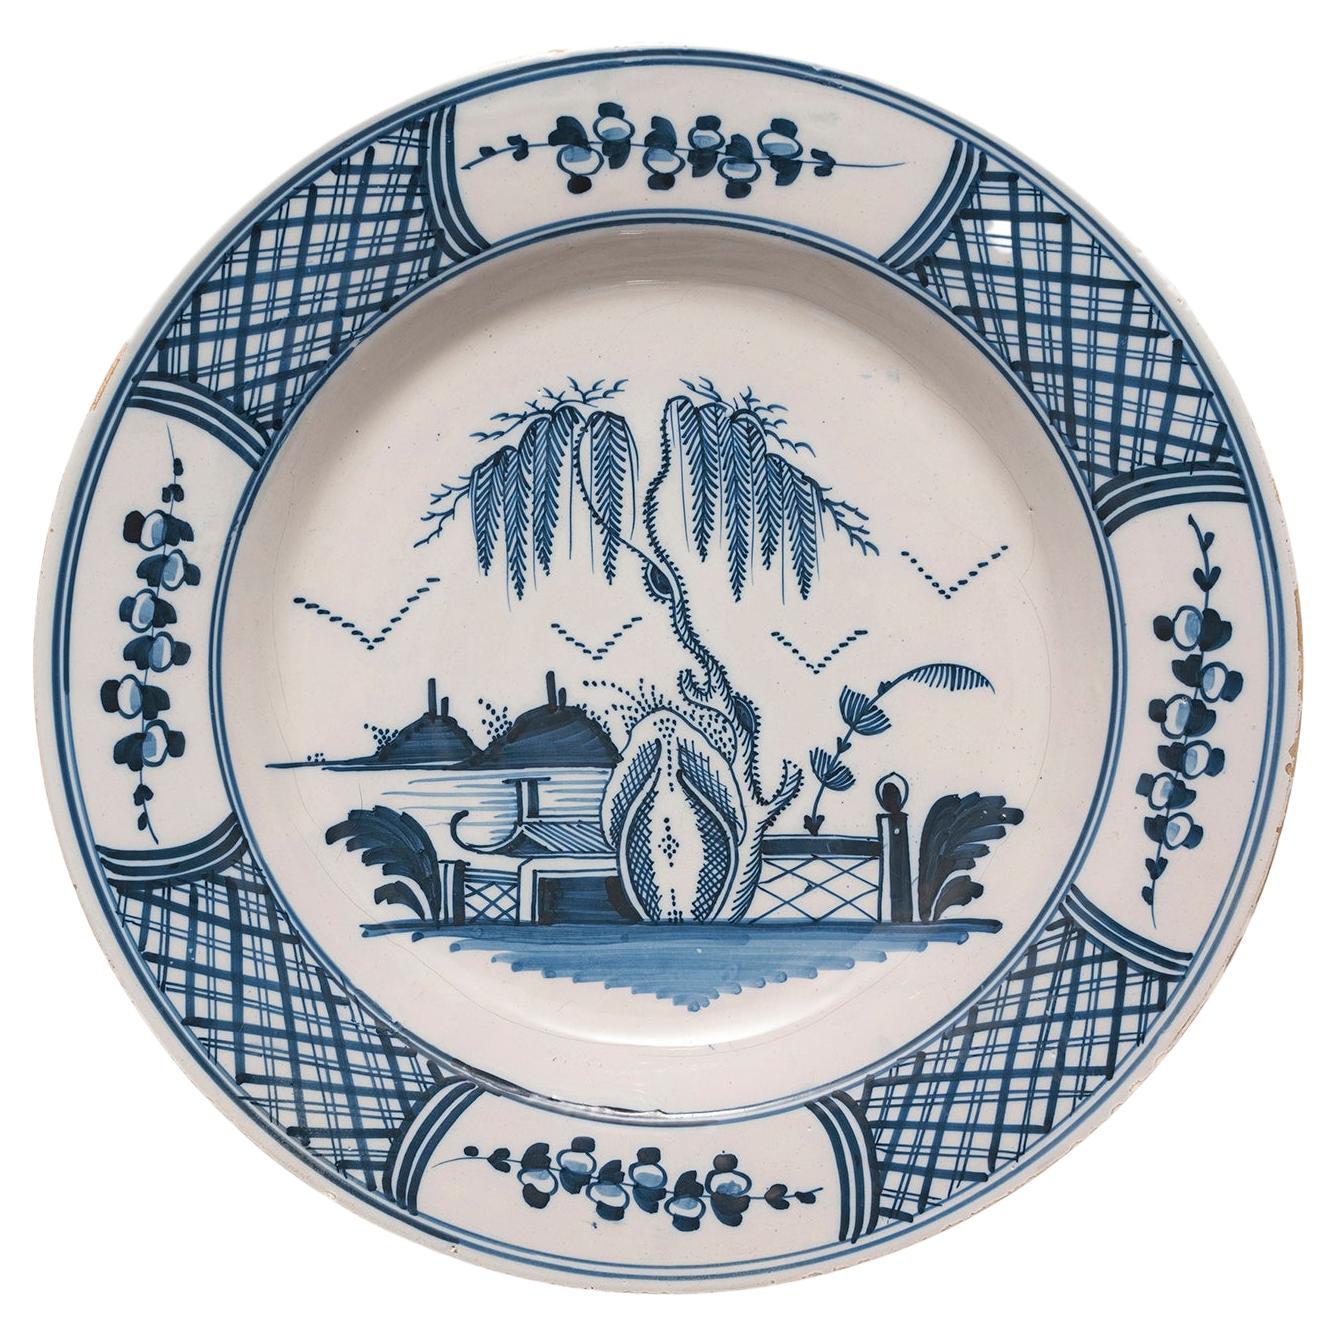 Dish Charger delftware Bristol blue white willow tree rocks Chinoiserie Trellis